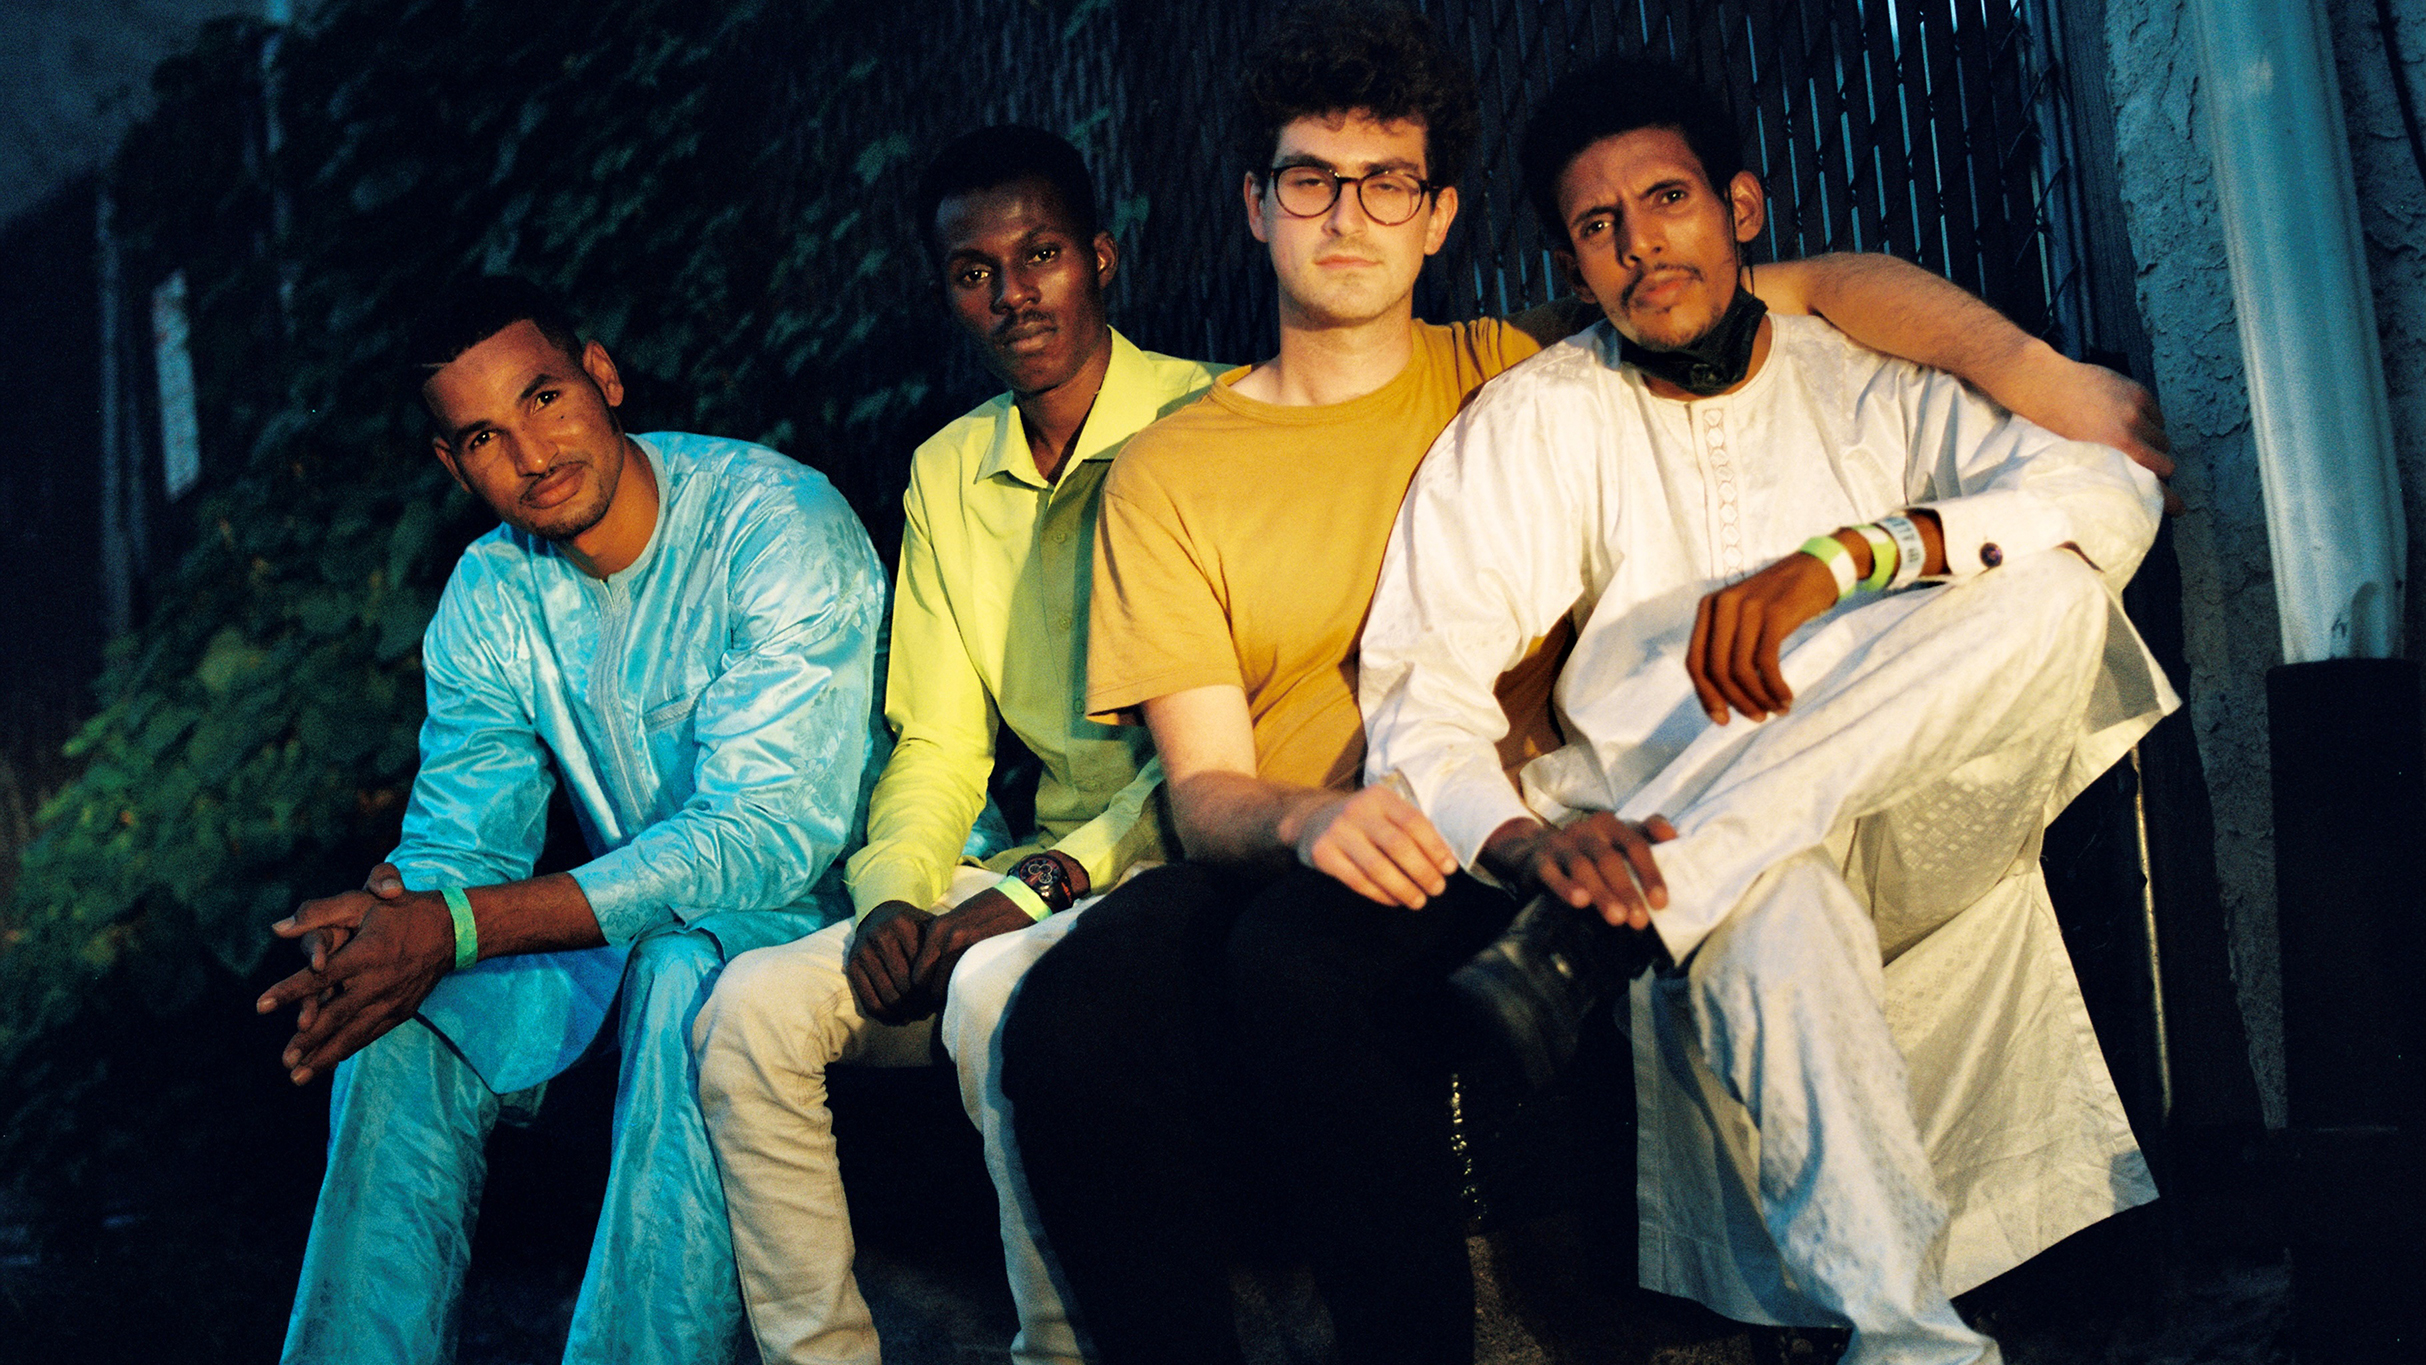 Mdou Moctar with J.R.C.G.